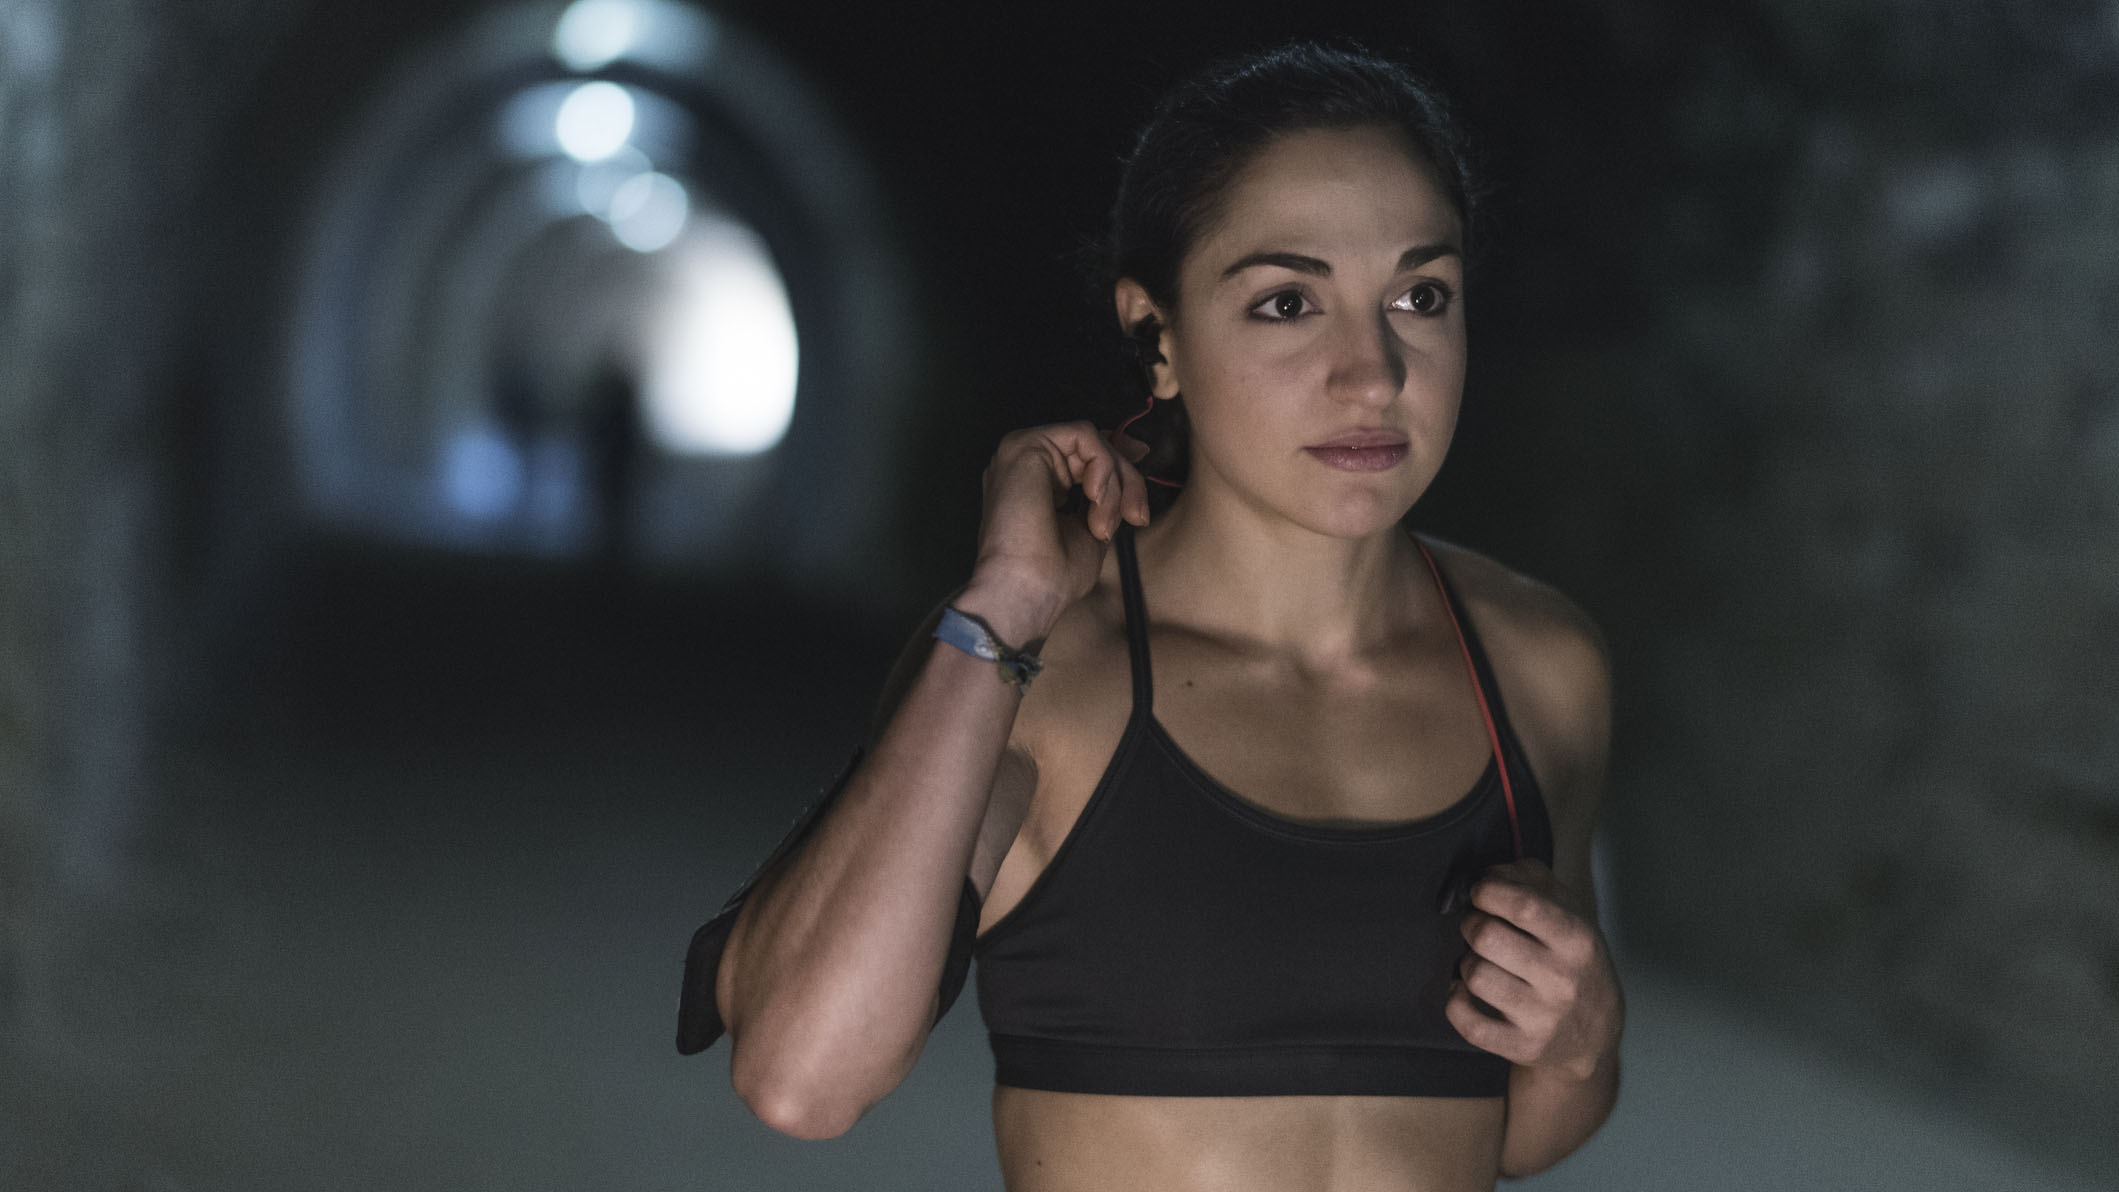 How tight should a sports bra be for running?